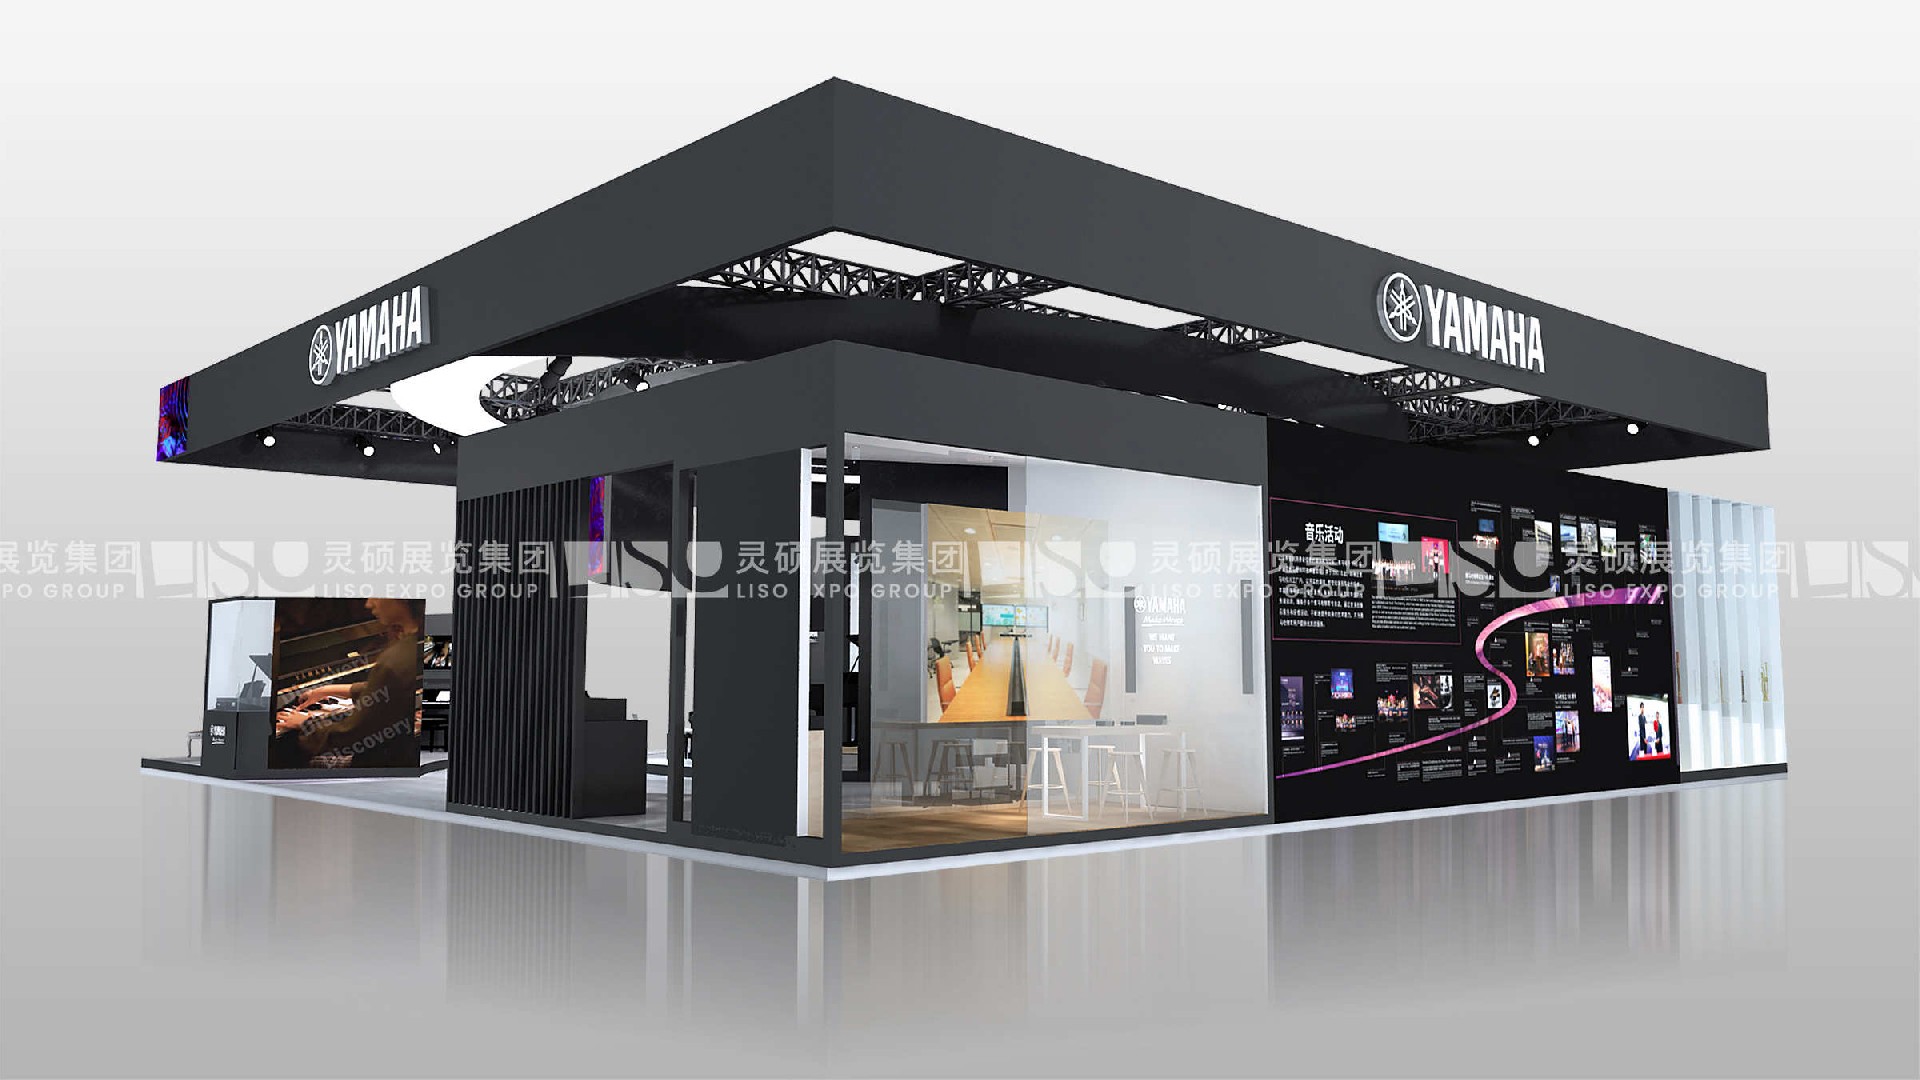 Yamaha-CIIE Booth Design and Construction Case